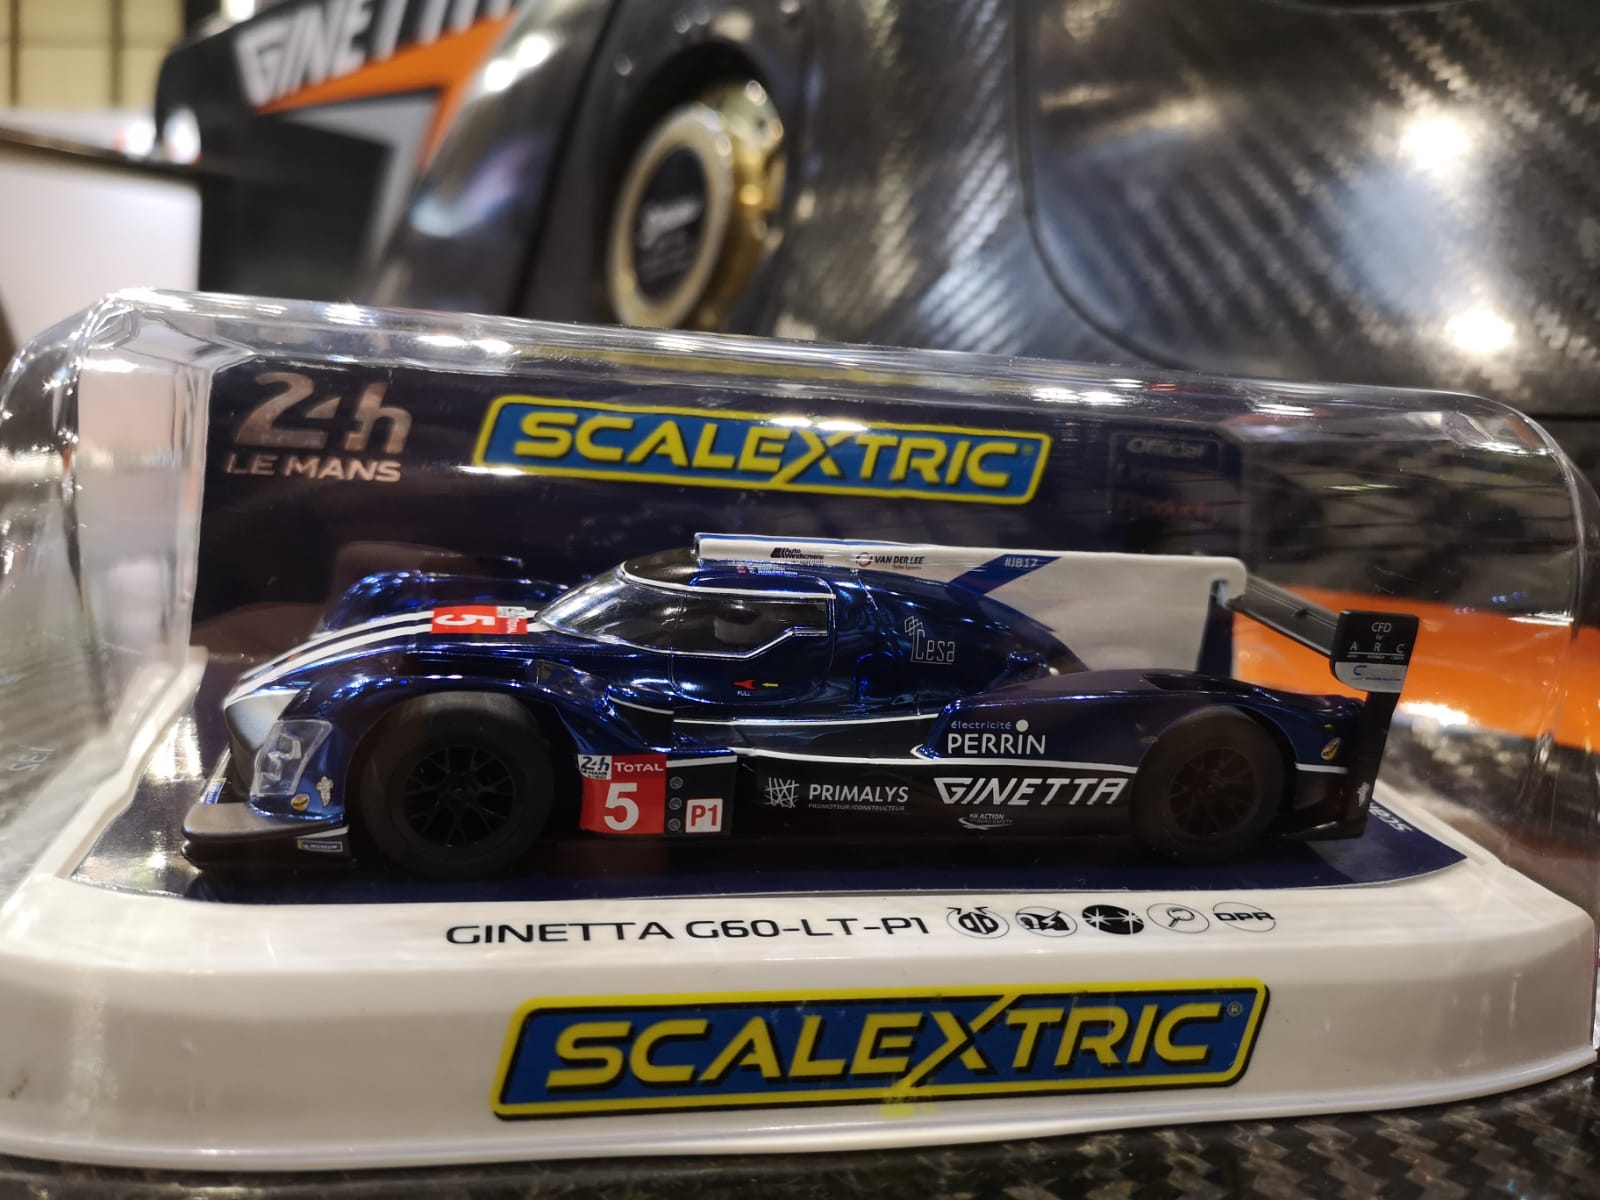 Ginetta Calling All Lmp1 Fans You Can Now Have Your Own Ginetta G60 Lt P1 Lemans 18 Car And Track Available Online And Instore With Scalextric T Co Fgsvy863ut Ginetta T Co Wkcwjkzknb